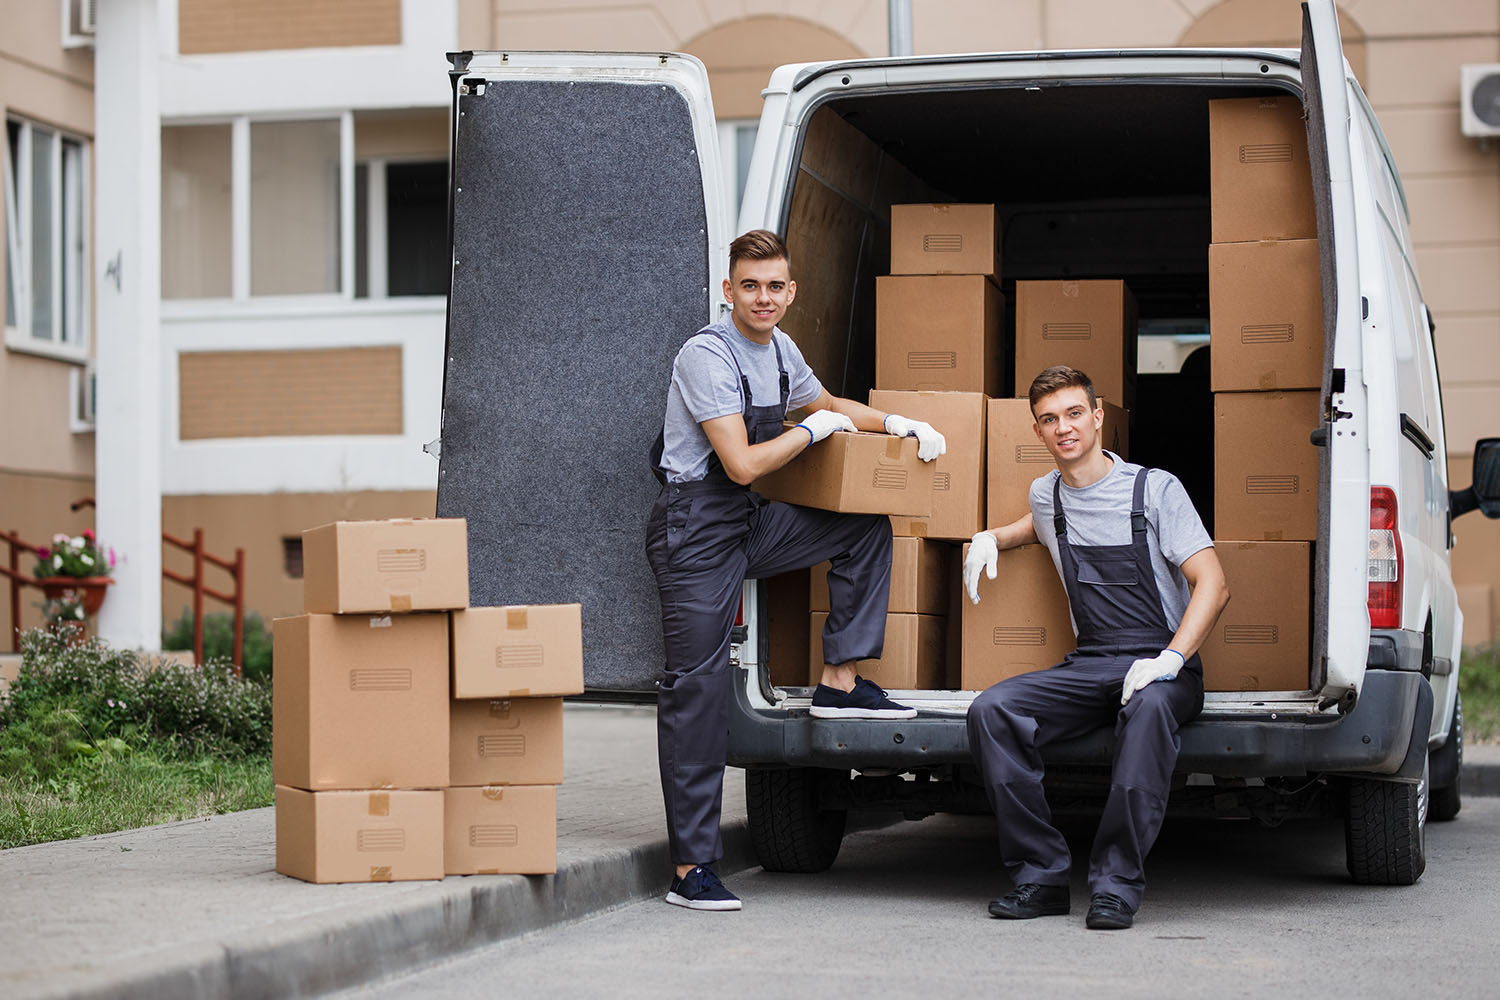 6 Tips for Stress-Free Packing and Relocation of Your Belongings